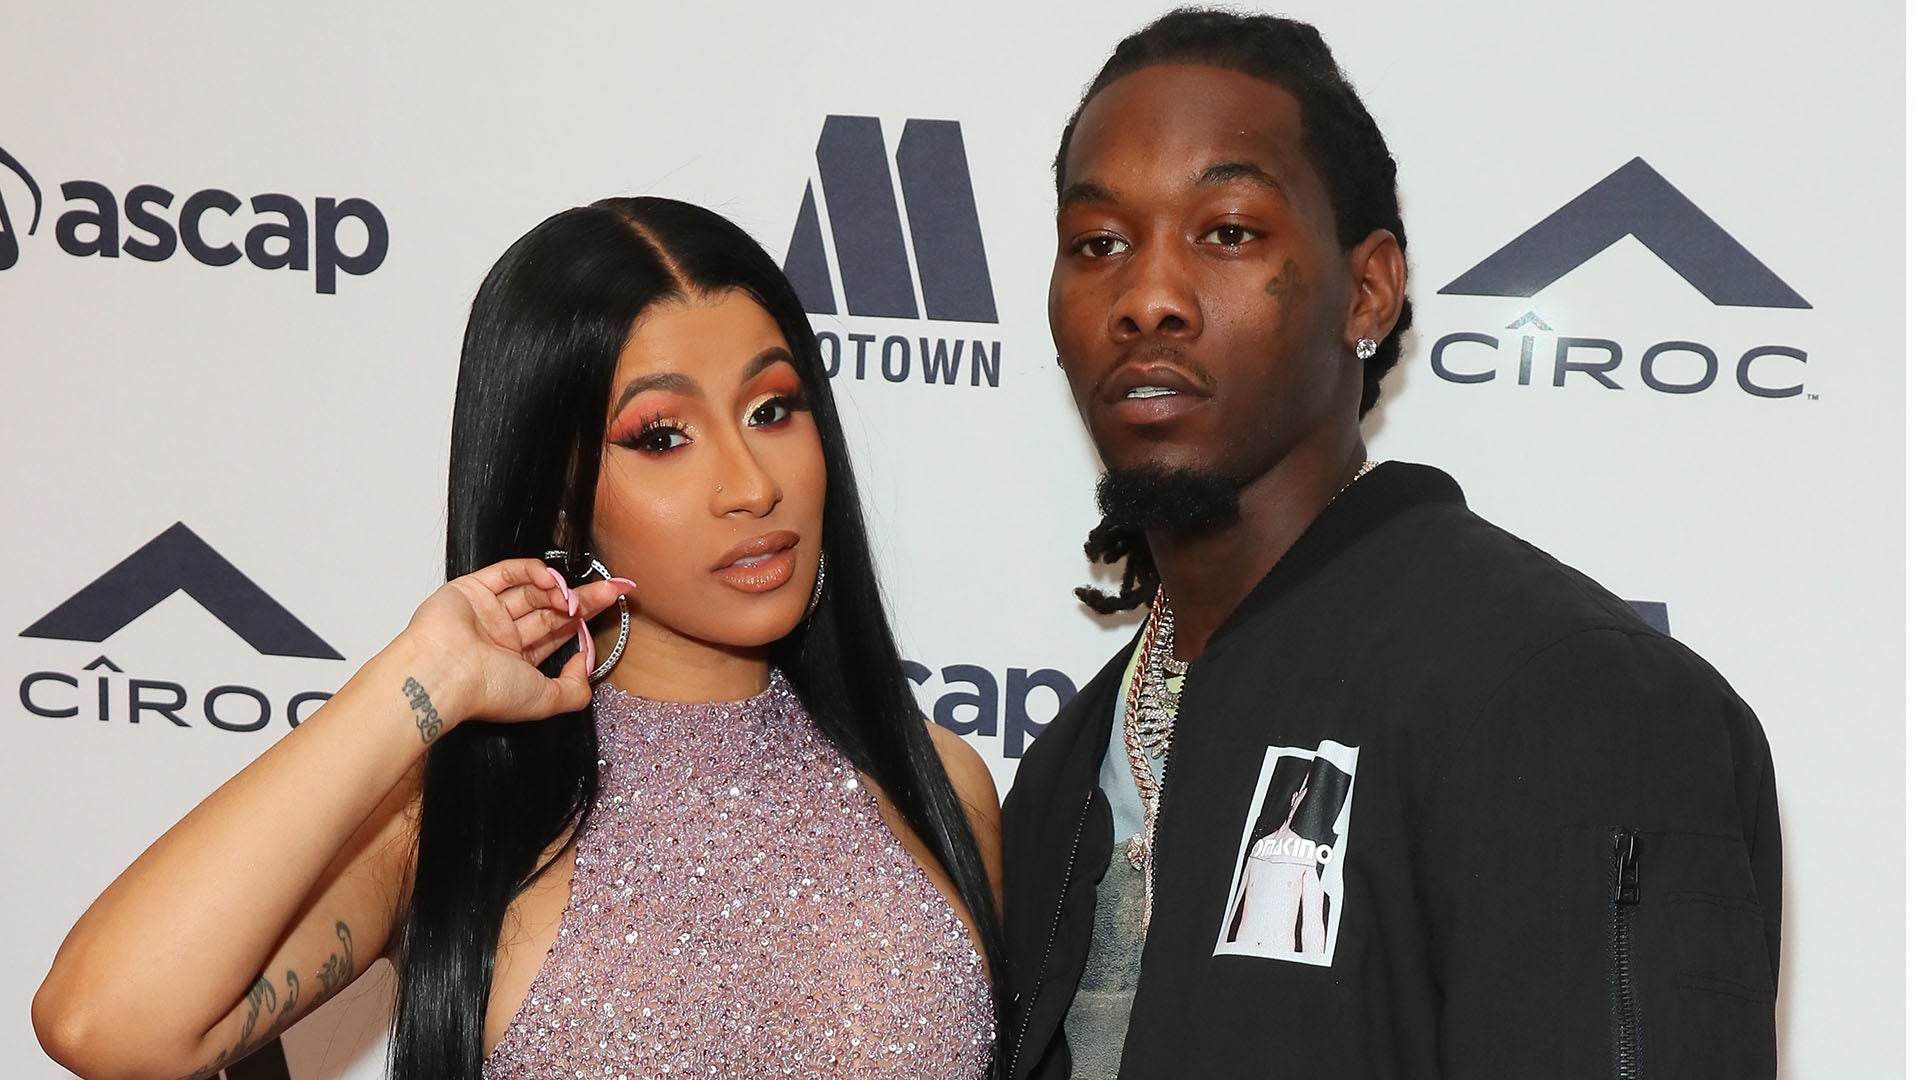 Cardi B and Offset's Family Has Impeccable Style